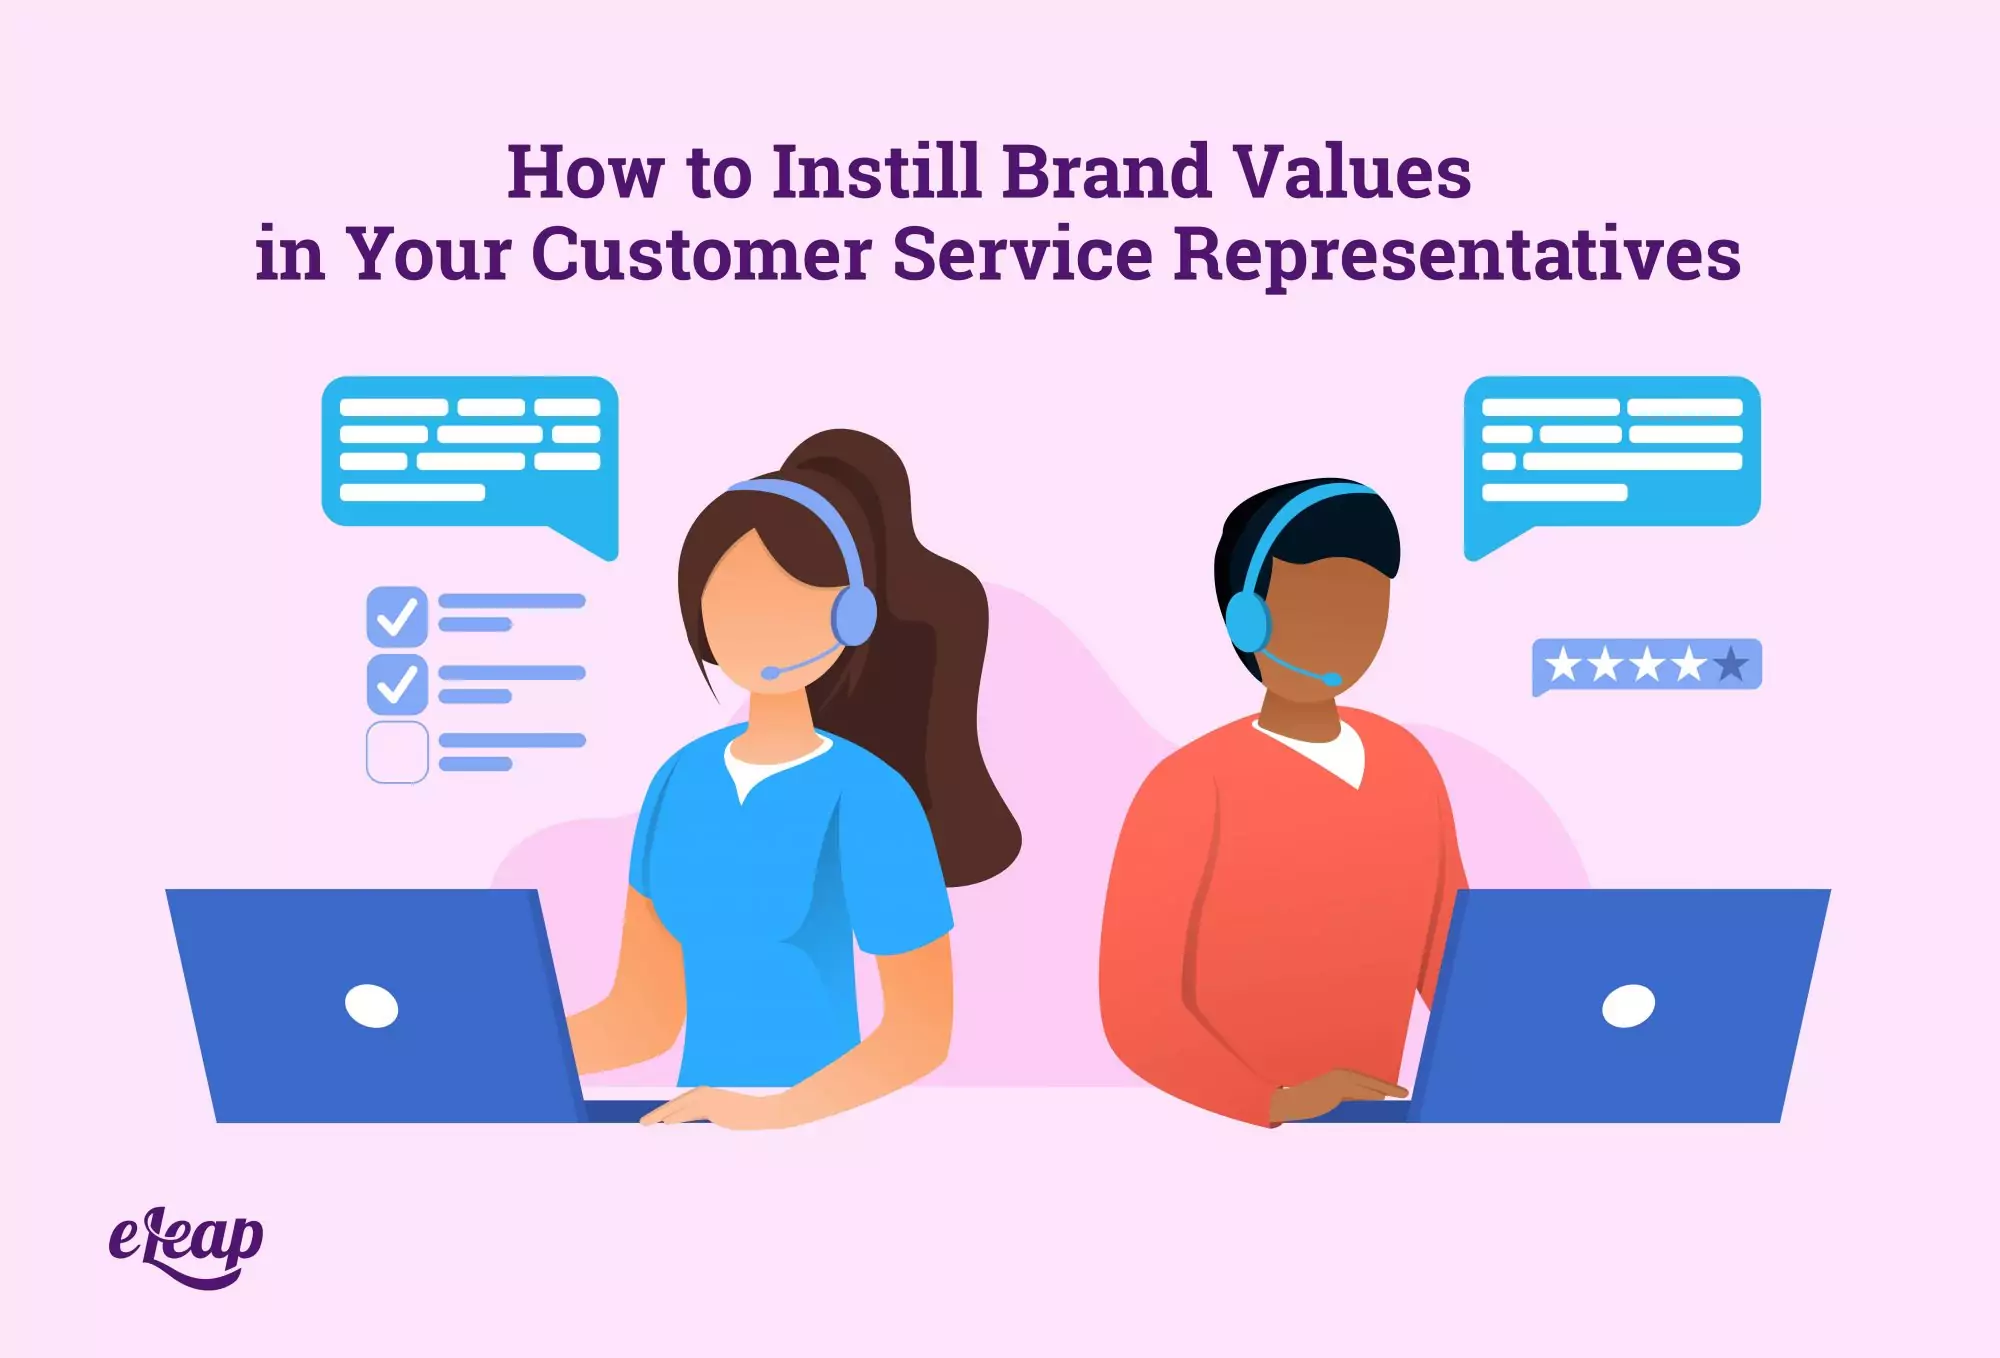 How to Instill Brand Values in Your Customer Service Representatives